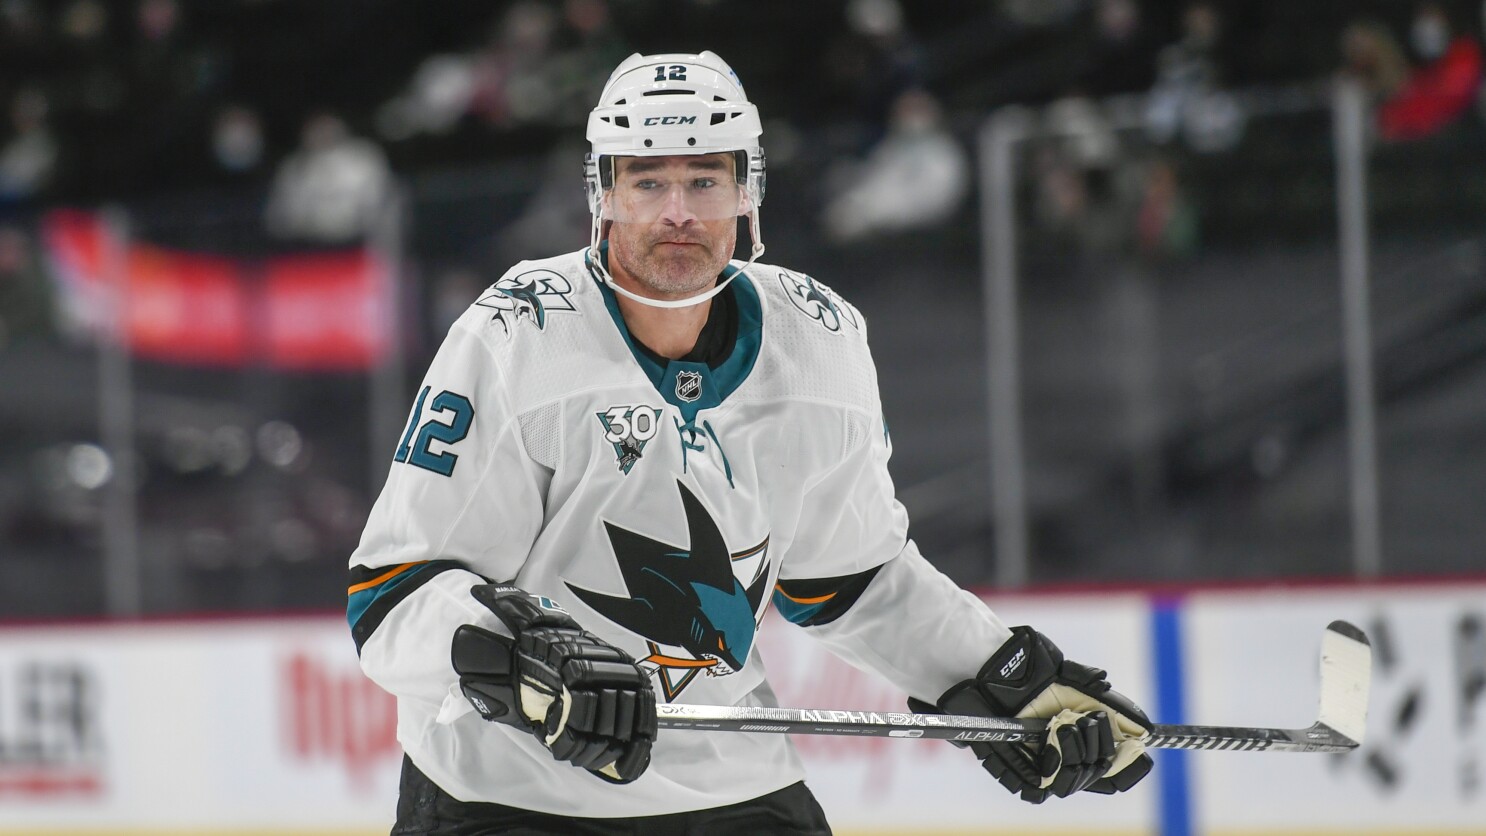 BREAKING: Marleau To Make Hockey Career Announcement on Tuesday